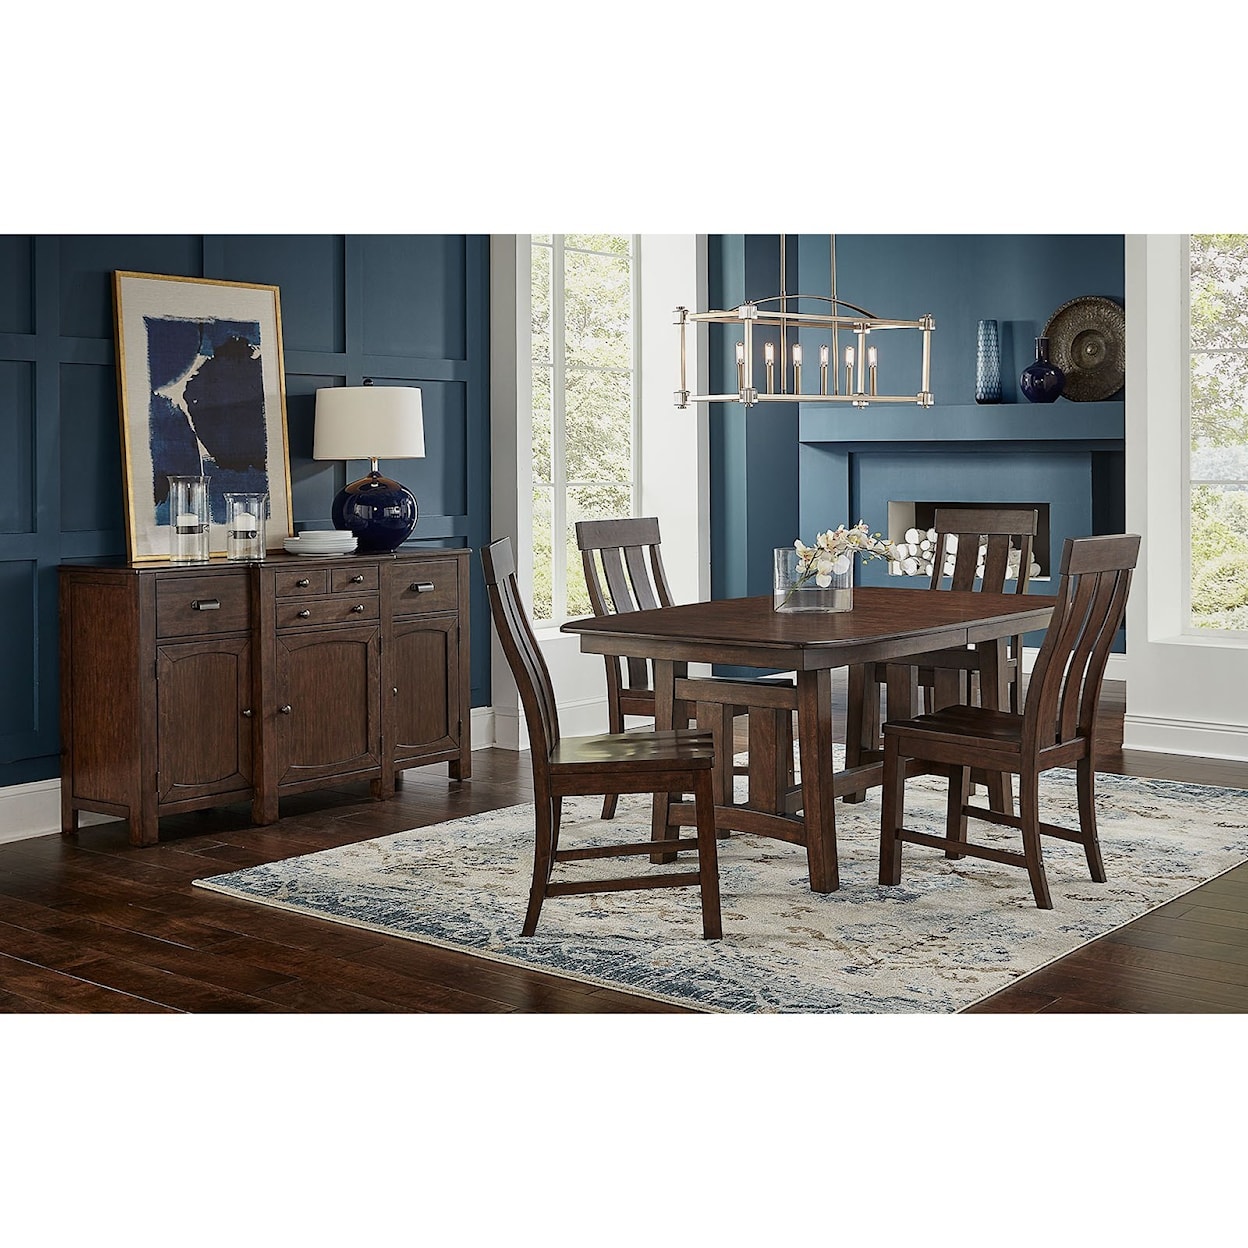 A-A Henderson 5-Piece Trestle Table and Chair Set